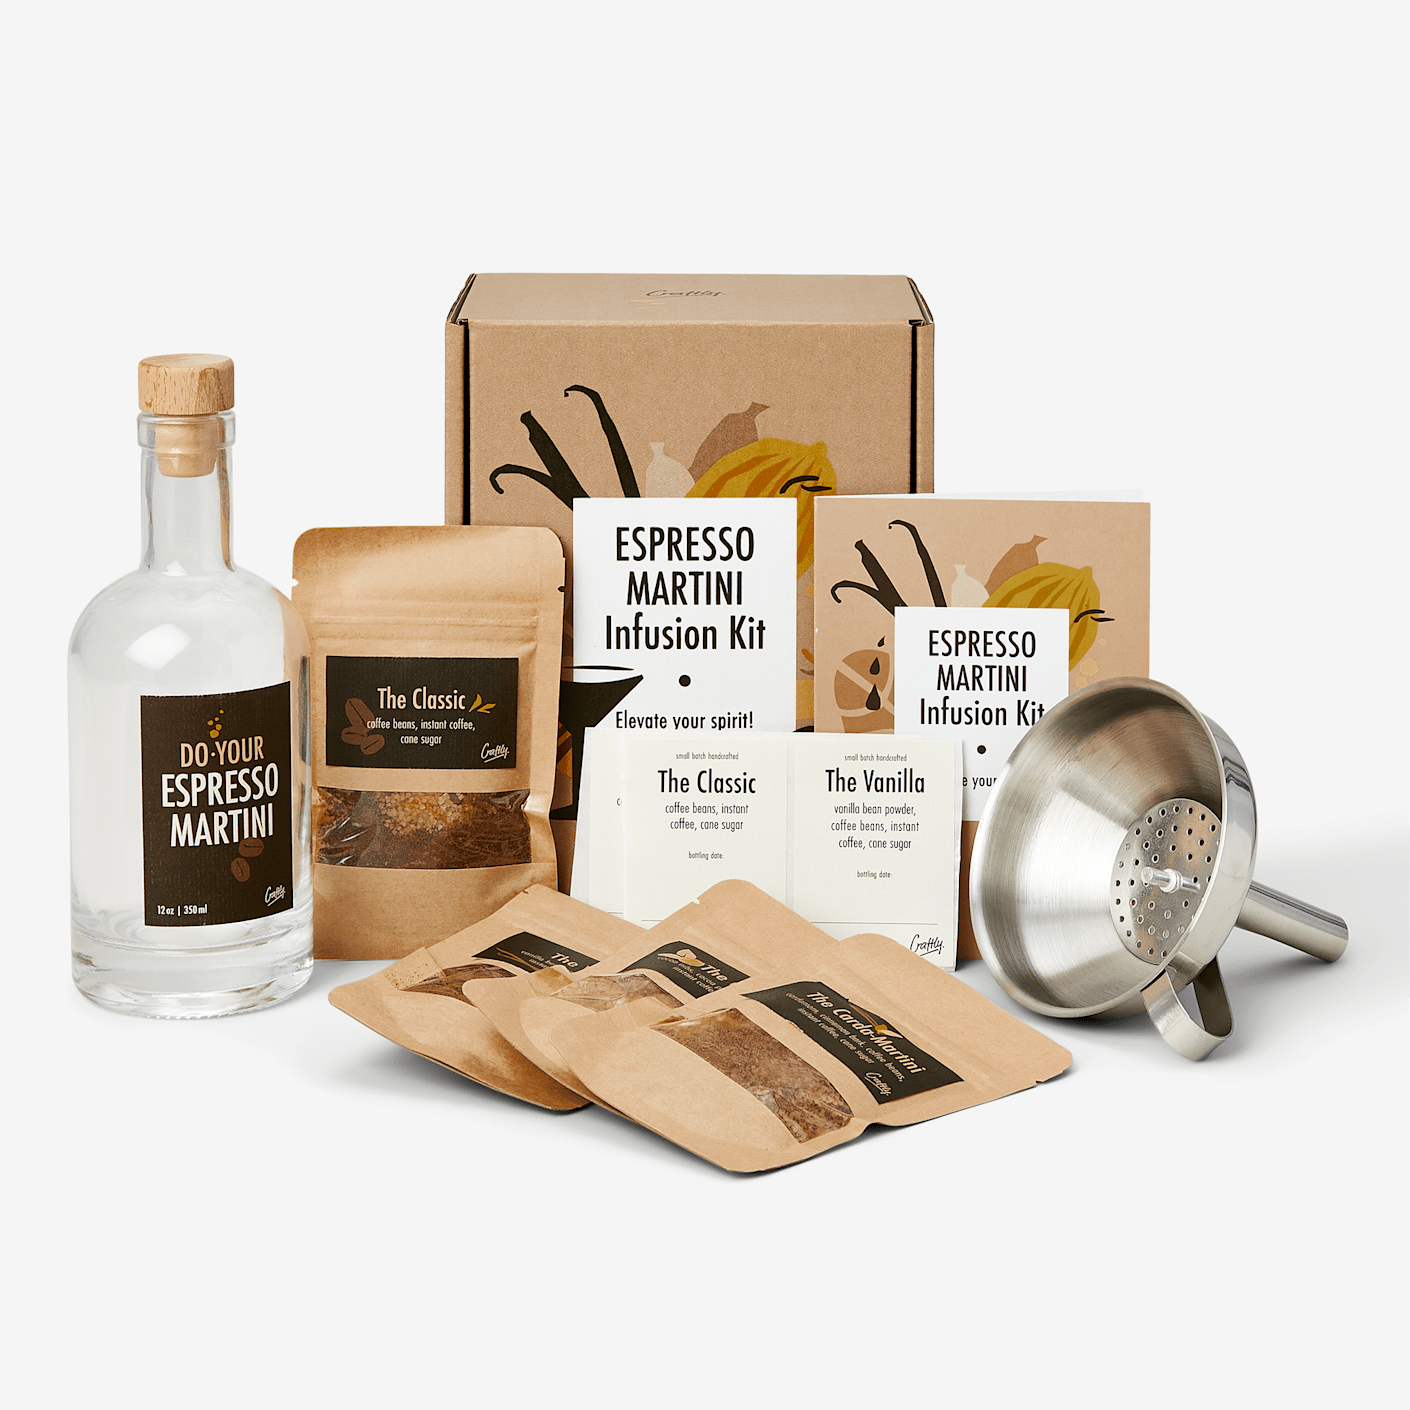 https://dam.bespokepost.com/image/upload/c_limit,dpr_auto,f_auto,q_auto,w_1410/v1/Storefront/2023/09-september/in-house/craftly-diy-expresso-martini-kit_1